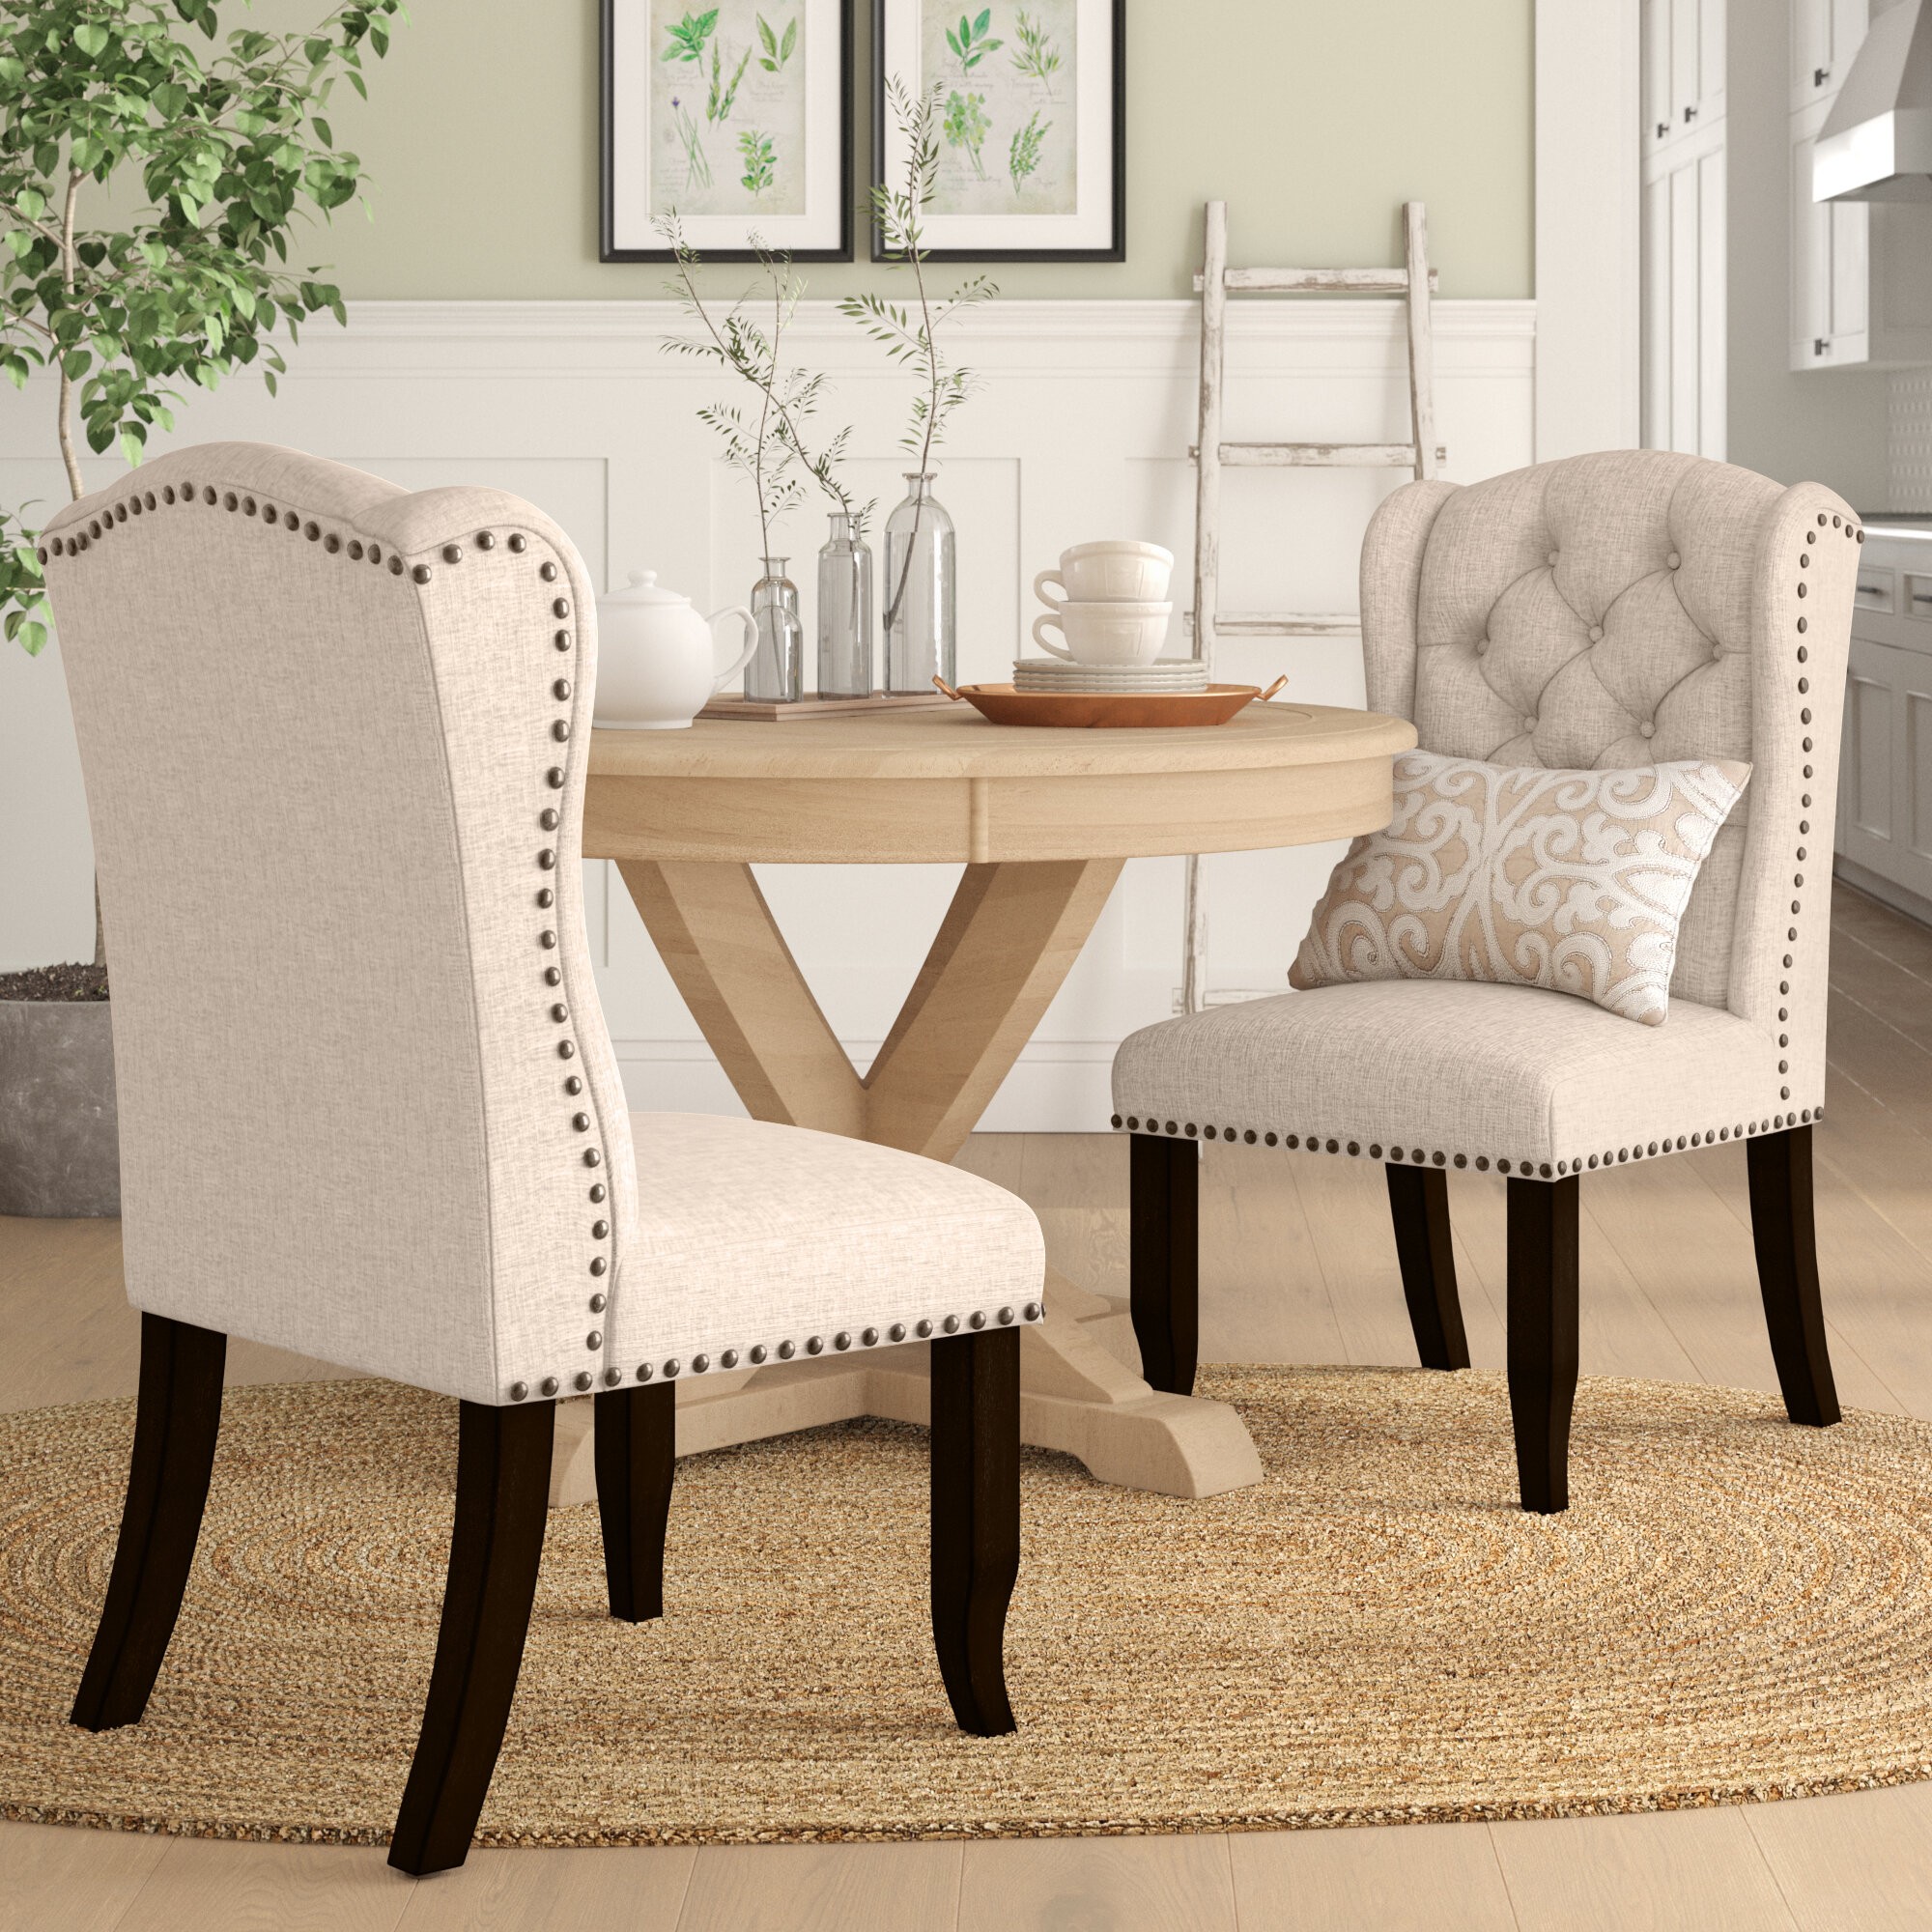 Calila Tufted Polyester Blend Upholstered Wingback Side Chair in Beige (Set of 2)